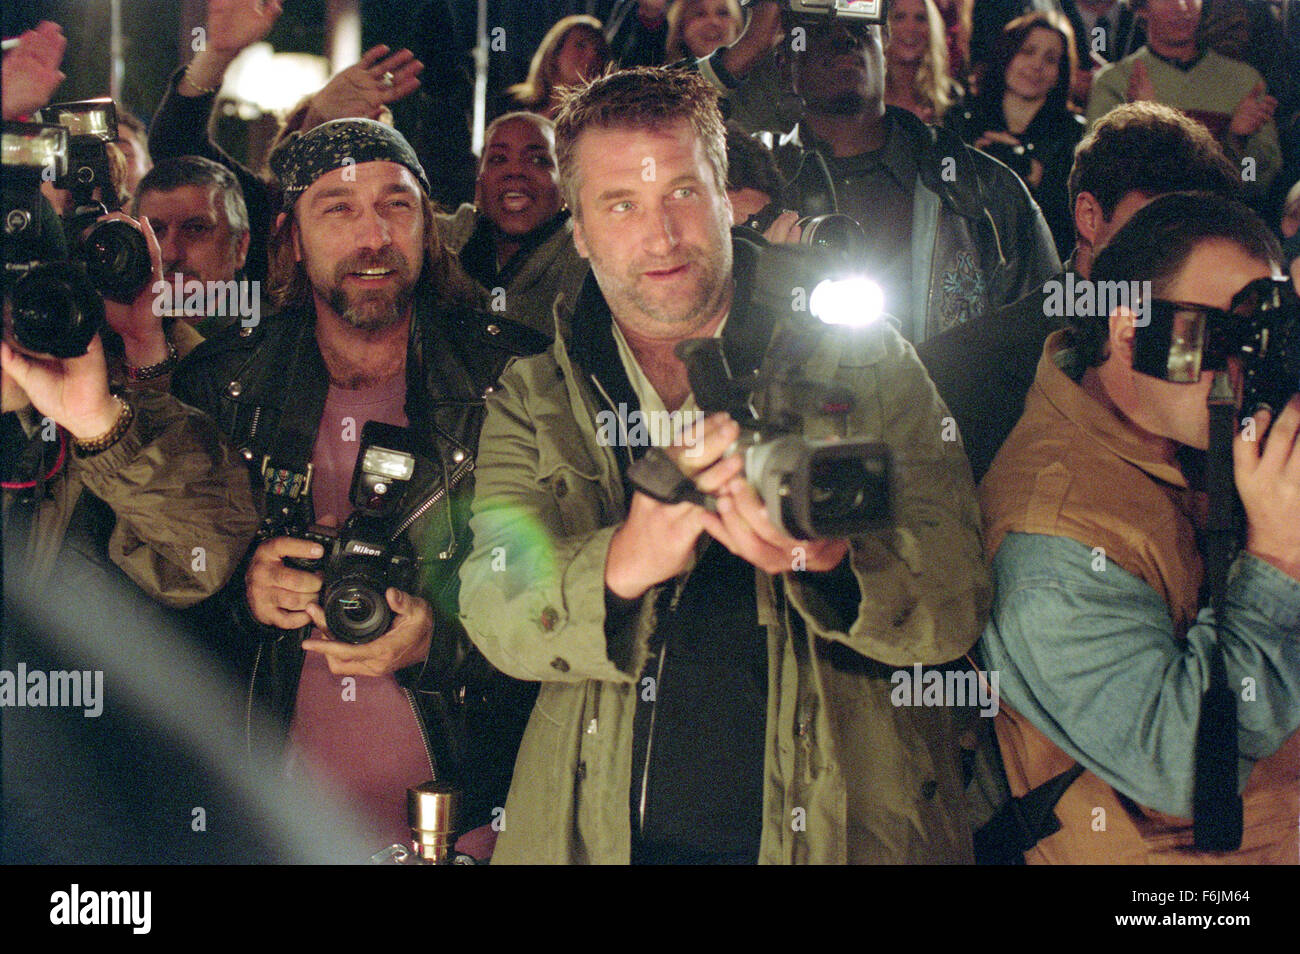 RELEASE DATE: September 3, 2004. MOVIE TITLE: Paparazzi. STUDIO: 20th Century Fox. PLOT: A rising Hollywood actor decides to take personal revenge against a group of four persistent photographers to make them pay for almost causing a personal tragedy involving his wife and son. PICTURED: DANIEL BALDWIN as Paparazzo Wendell Stokes. Stock Photo